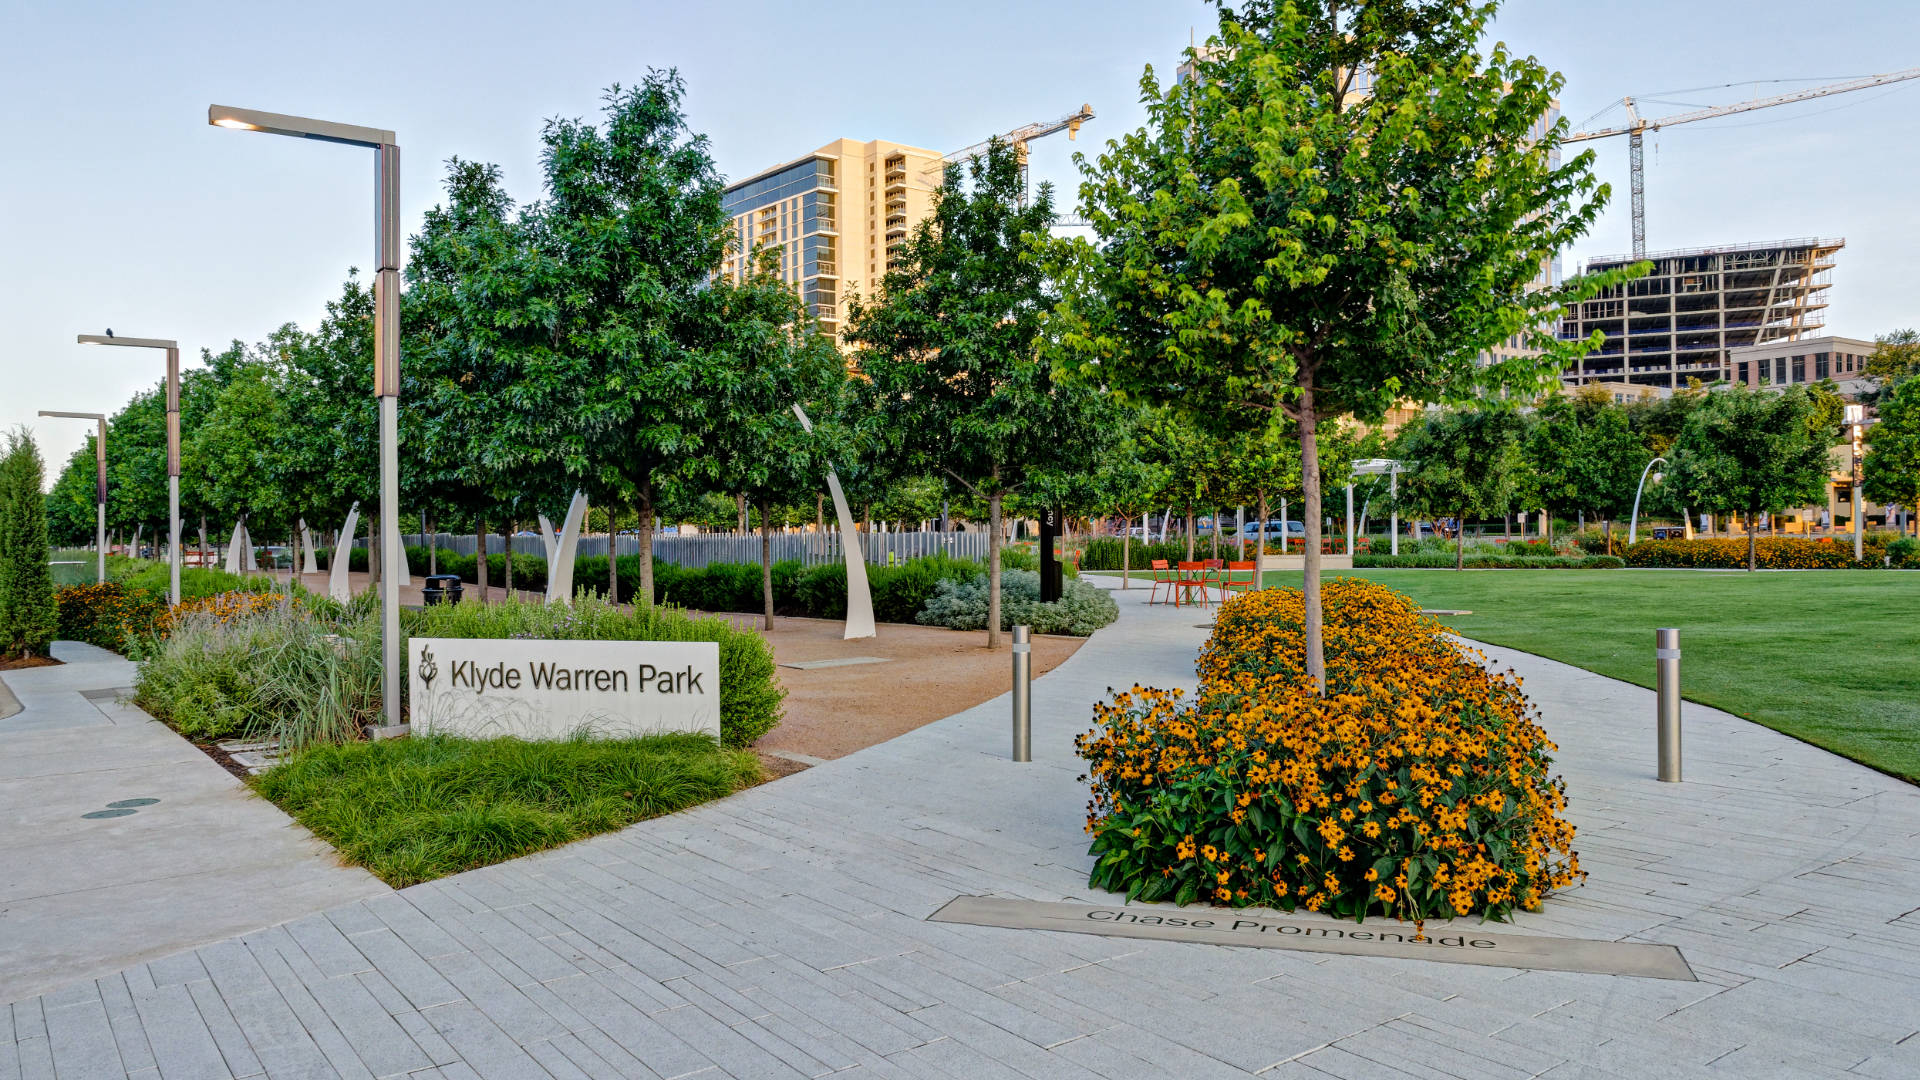 Commercial Landscaping Services of Klyde Warren Park by Southern Botanical